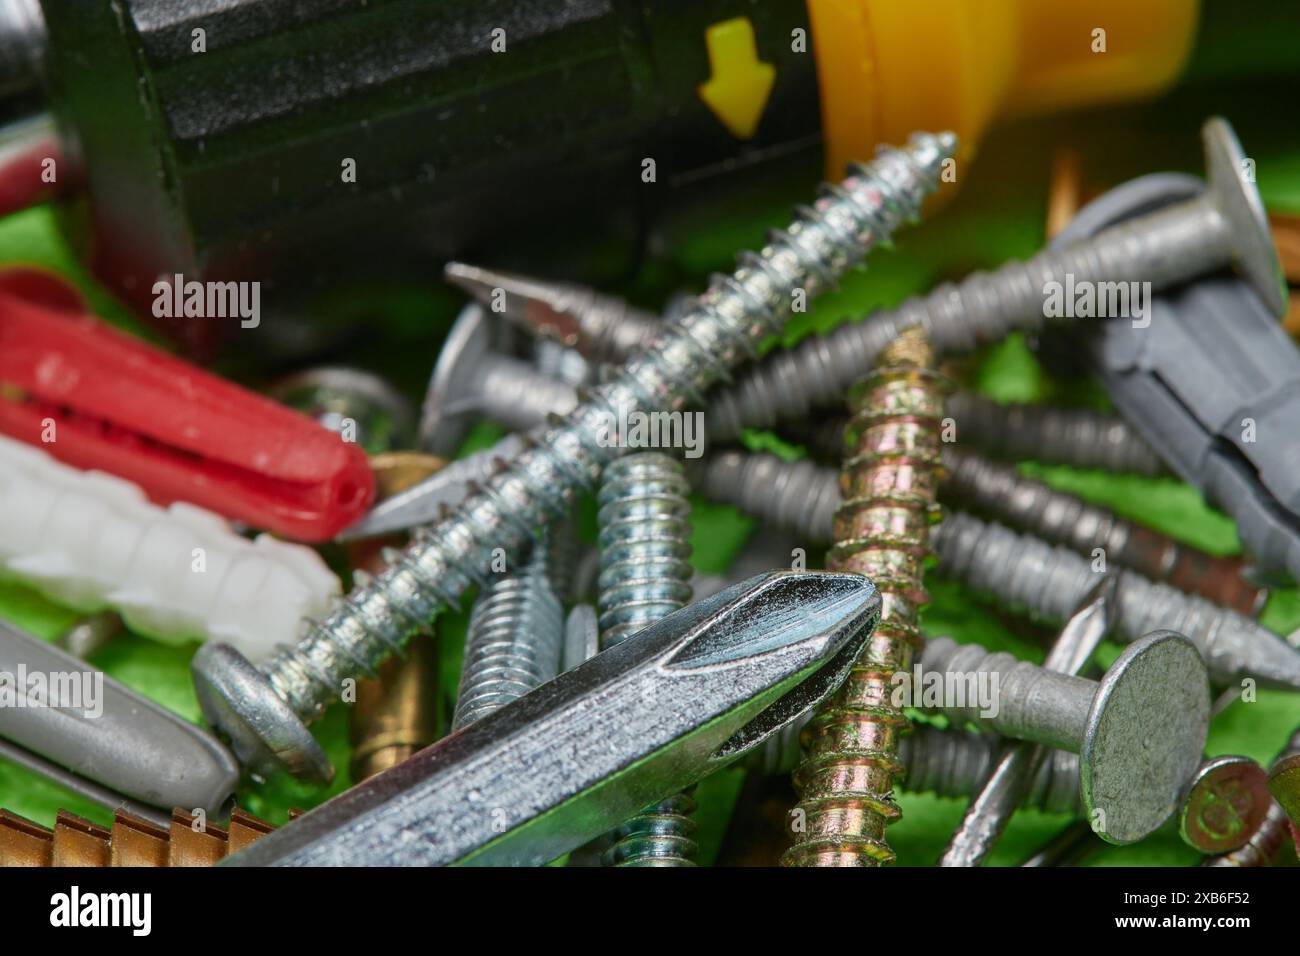 Household fasteners and hand tools, ratchet screw driver, screwdriver, nails, Wall plugs, screws, Household fasteners for the DIY handyman/woman!!! Stock Photo